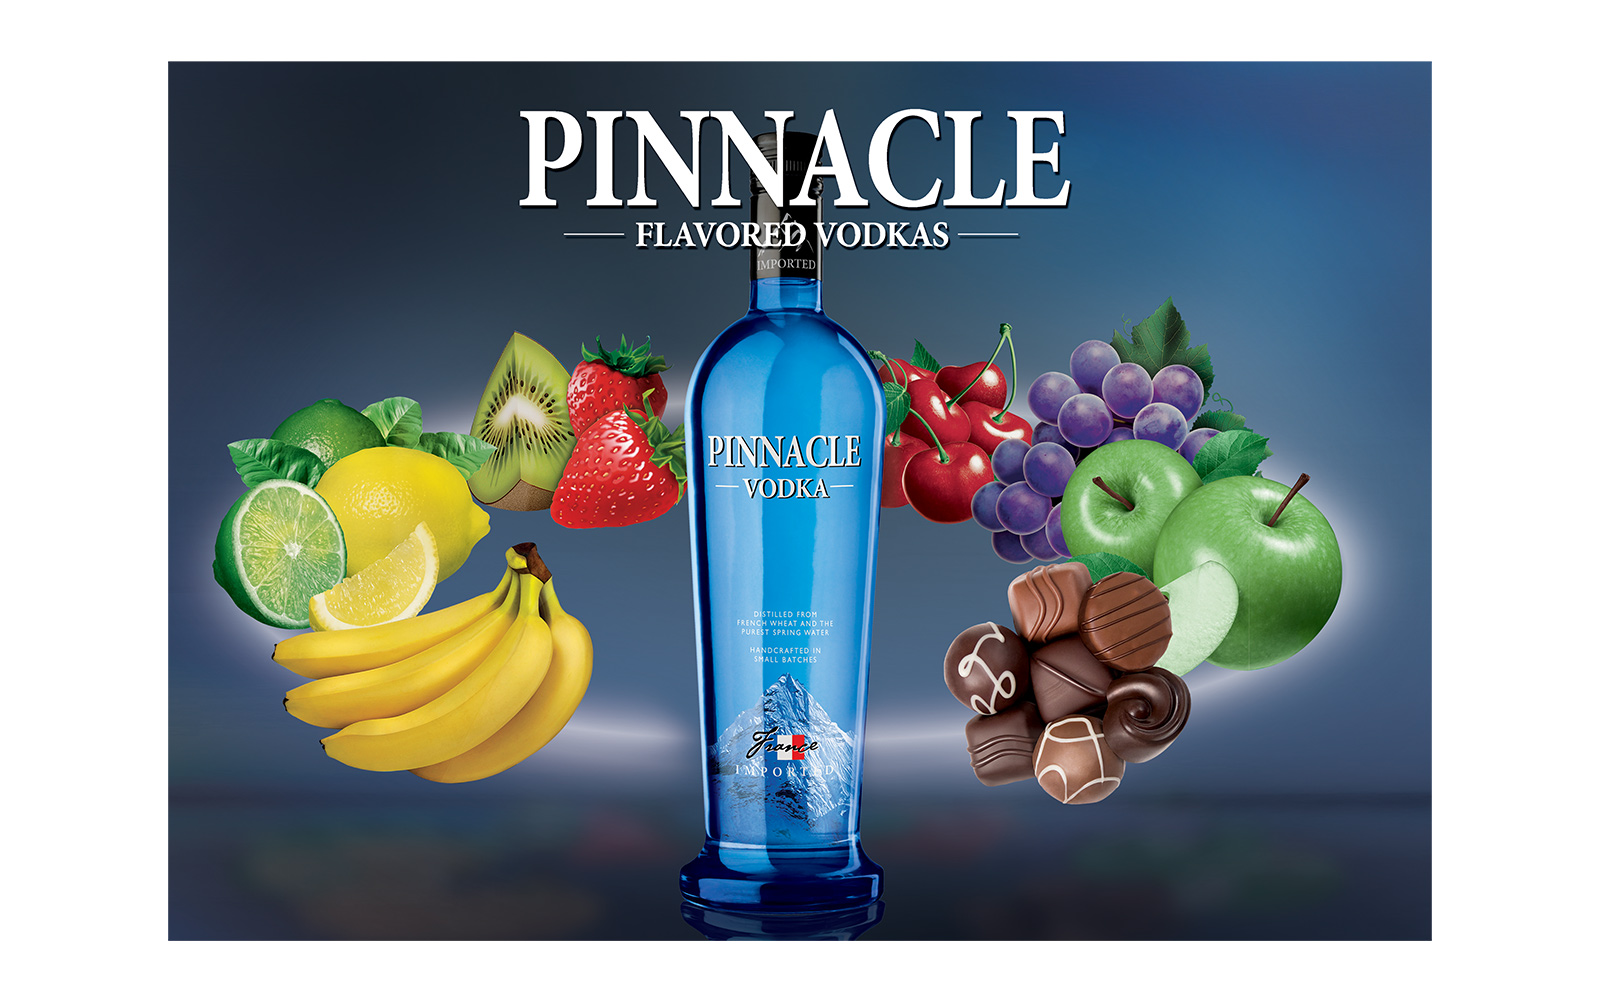 High-quality print and advertising for the spirits industry, depicting: Pinnacle.